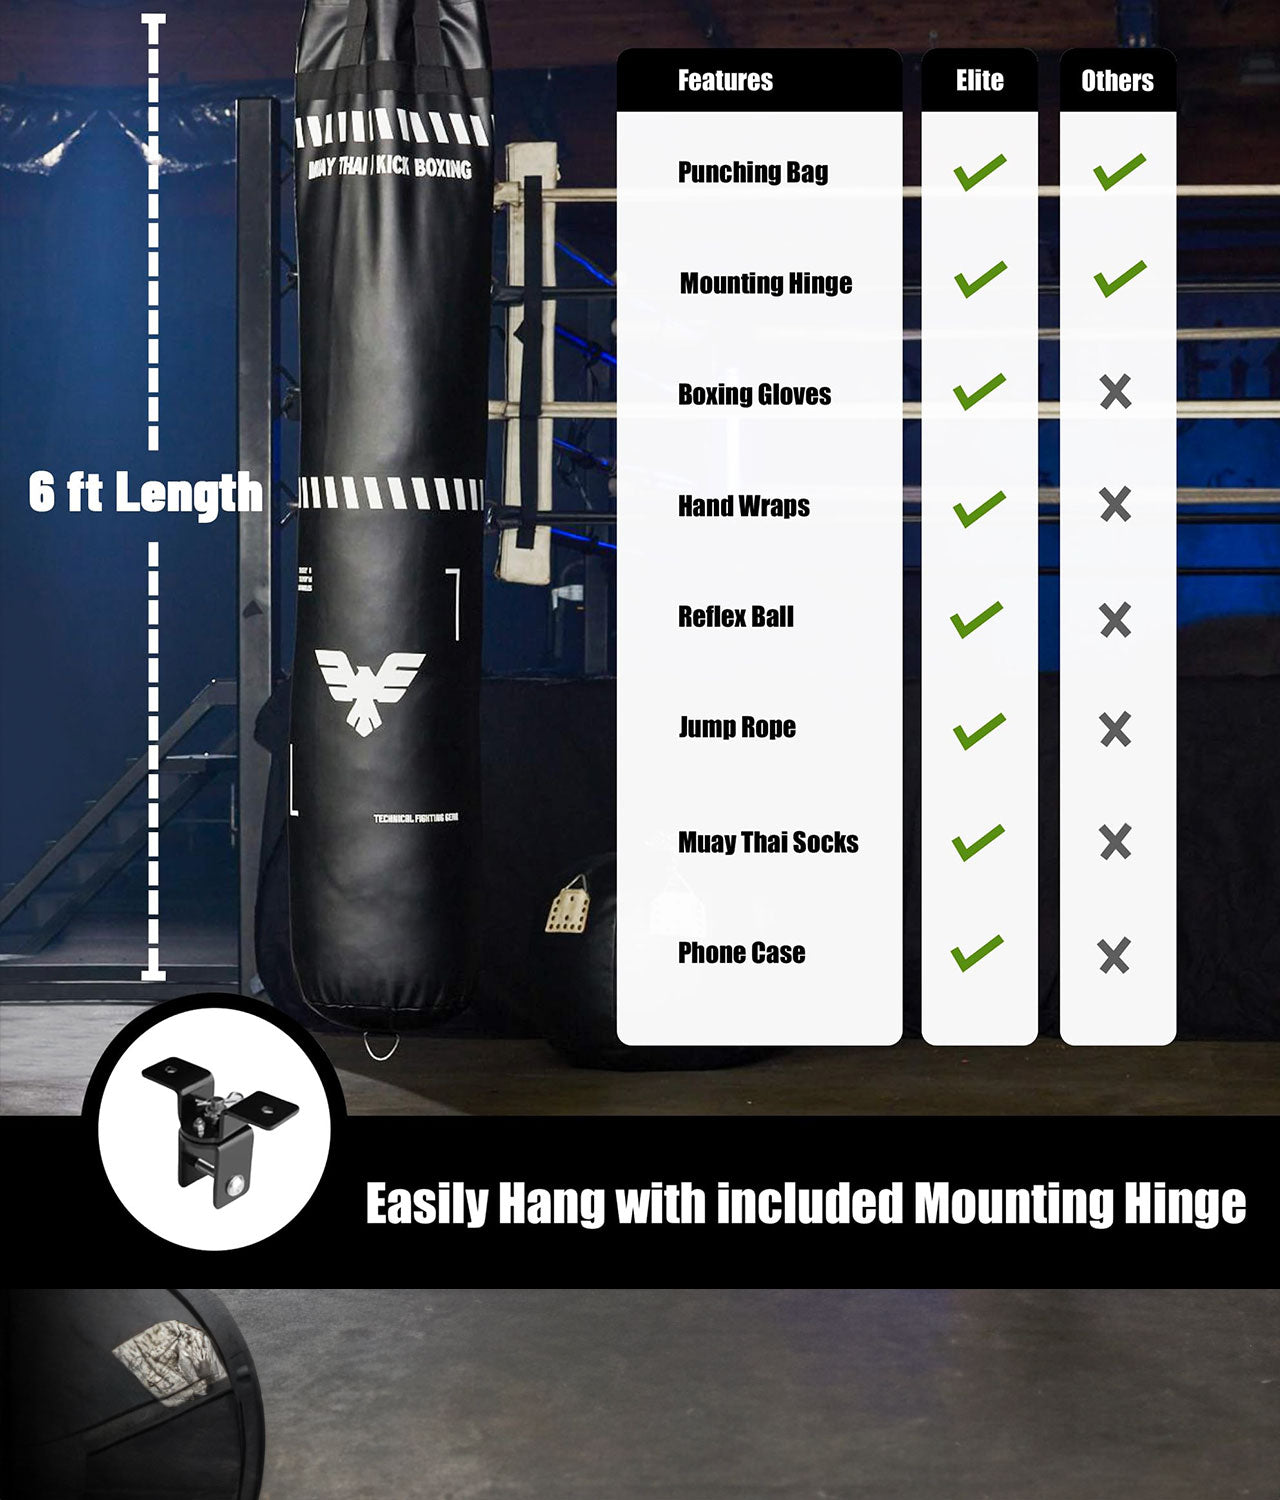 Elite Sports Adults Essential 6 ft Muay Thai Punching Bag Set Features